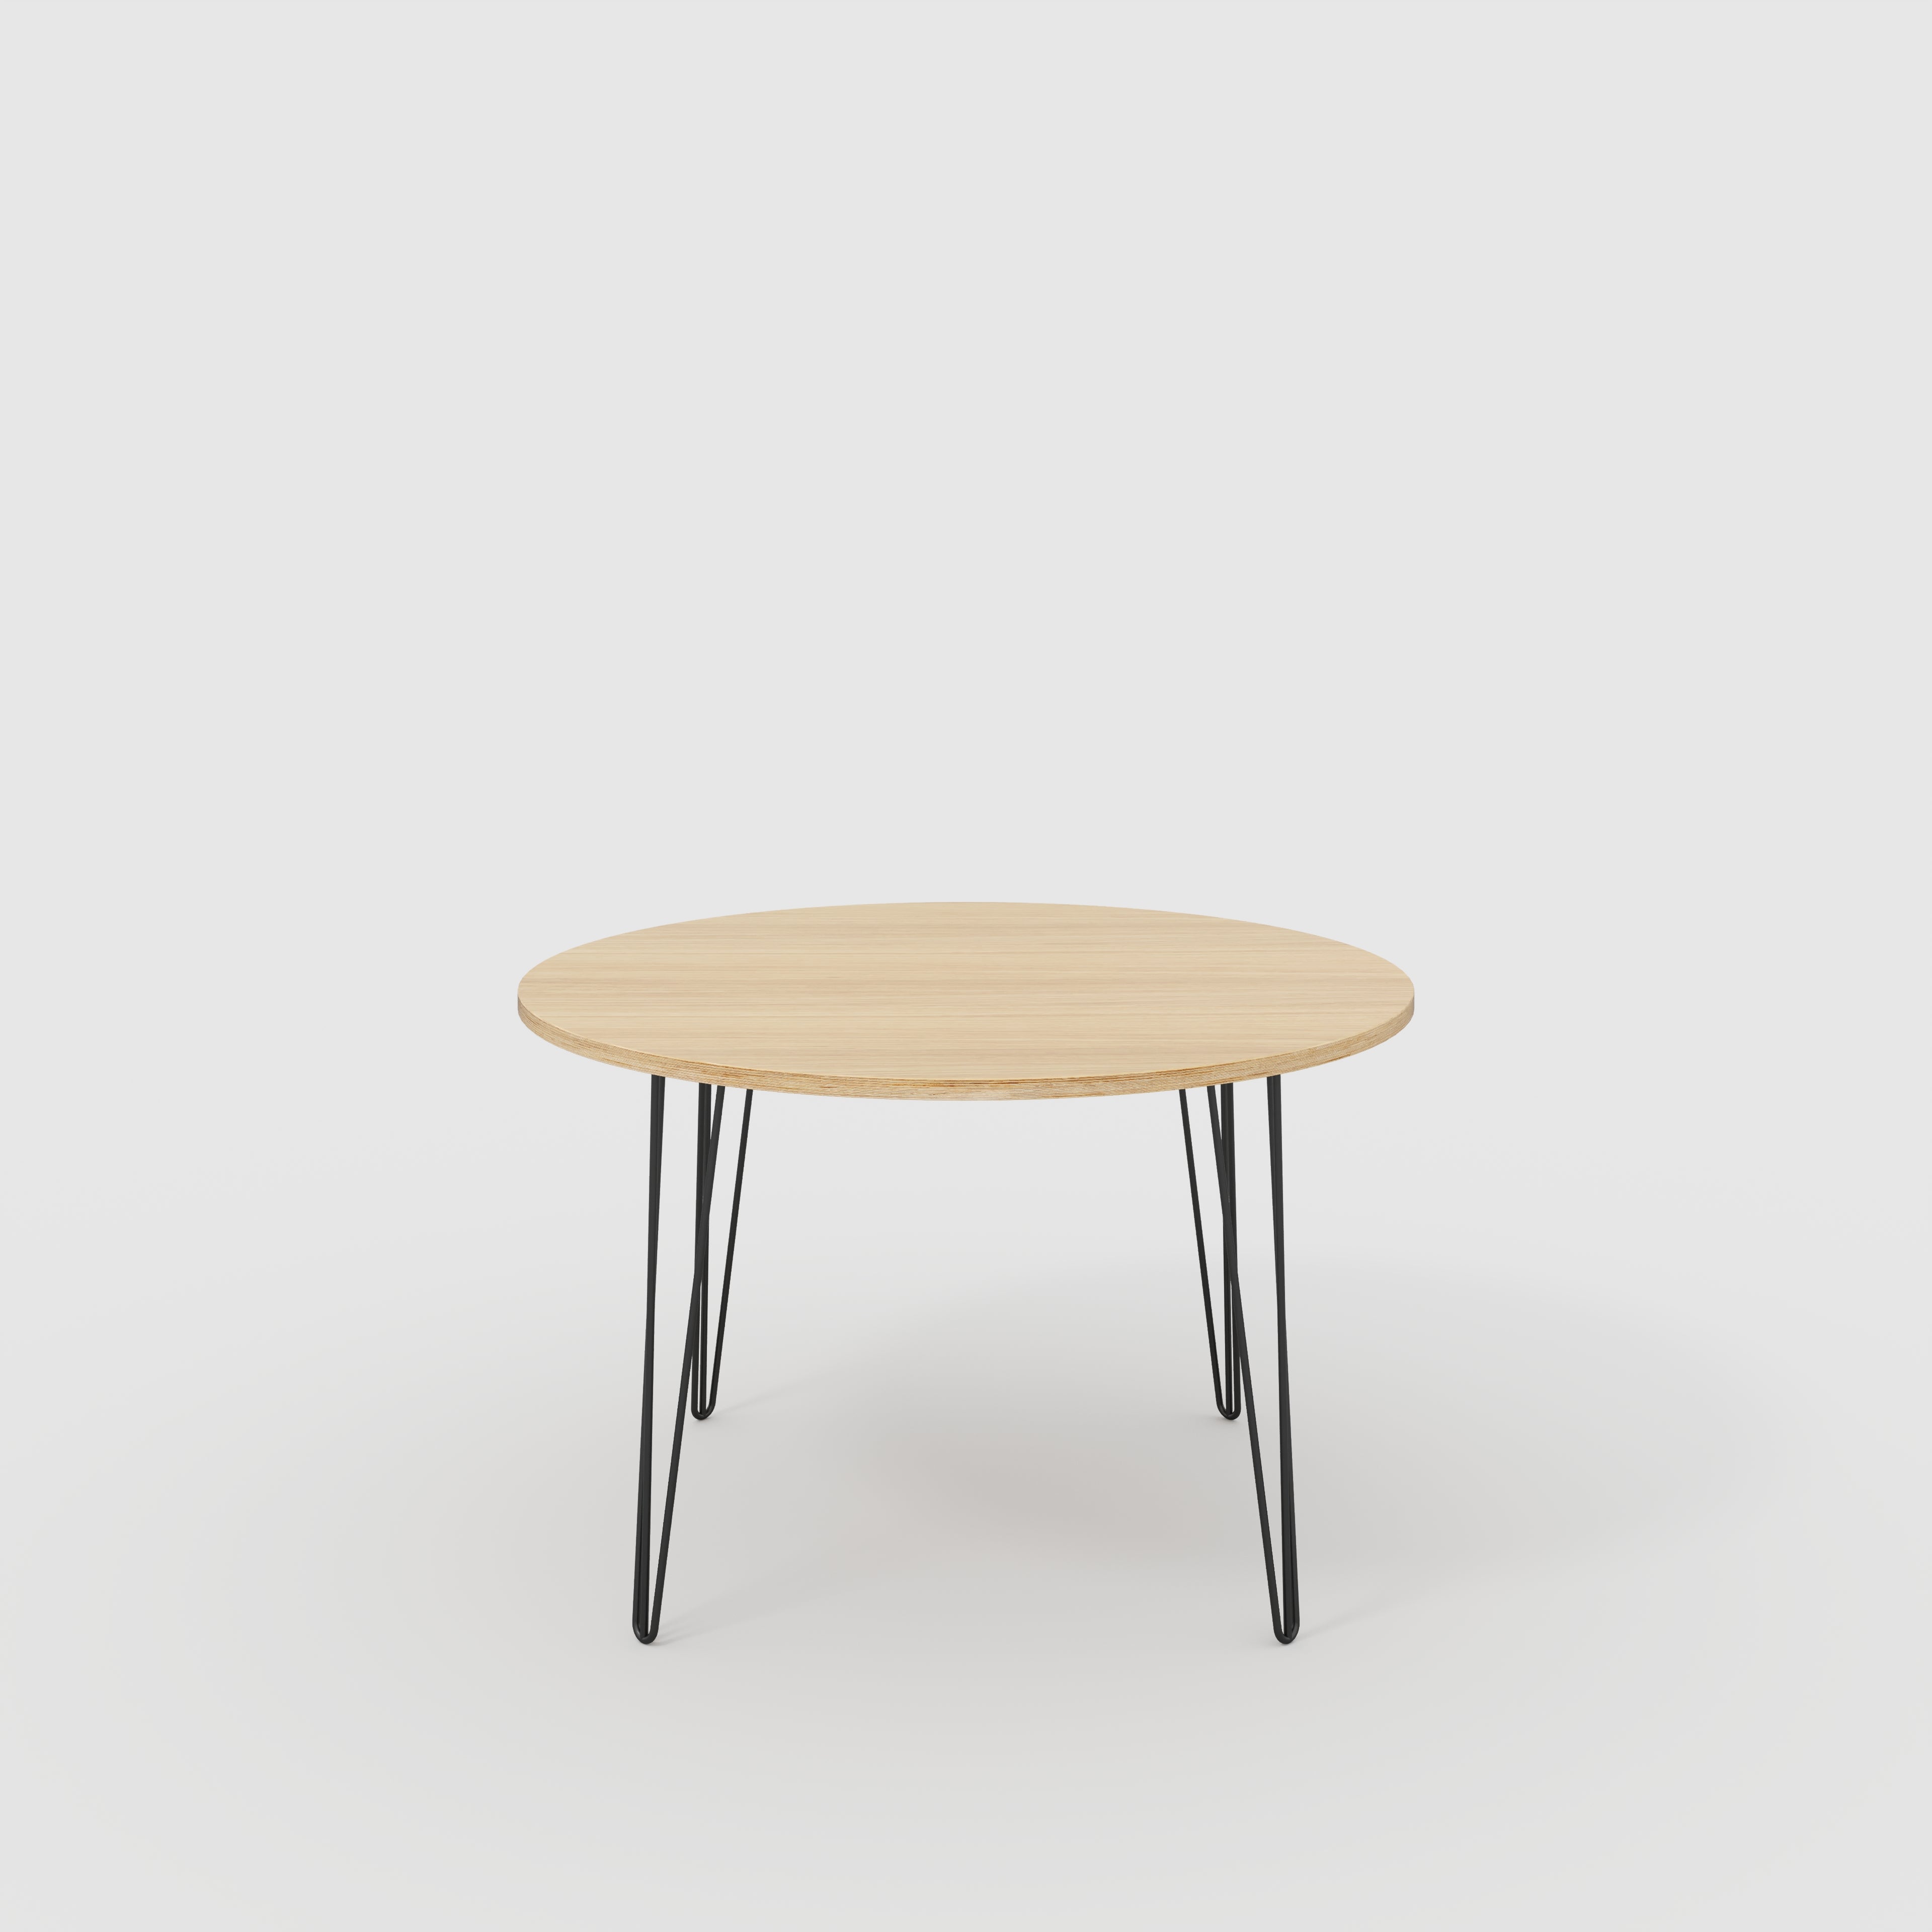 Round Table with Black Hairpin Legs - Plywood Oak - 1200(dia) x 735(h)